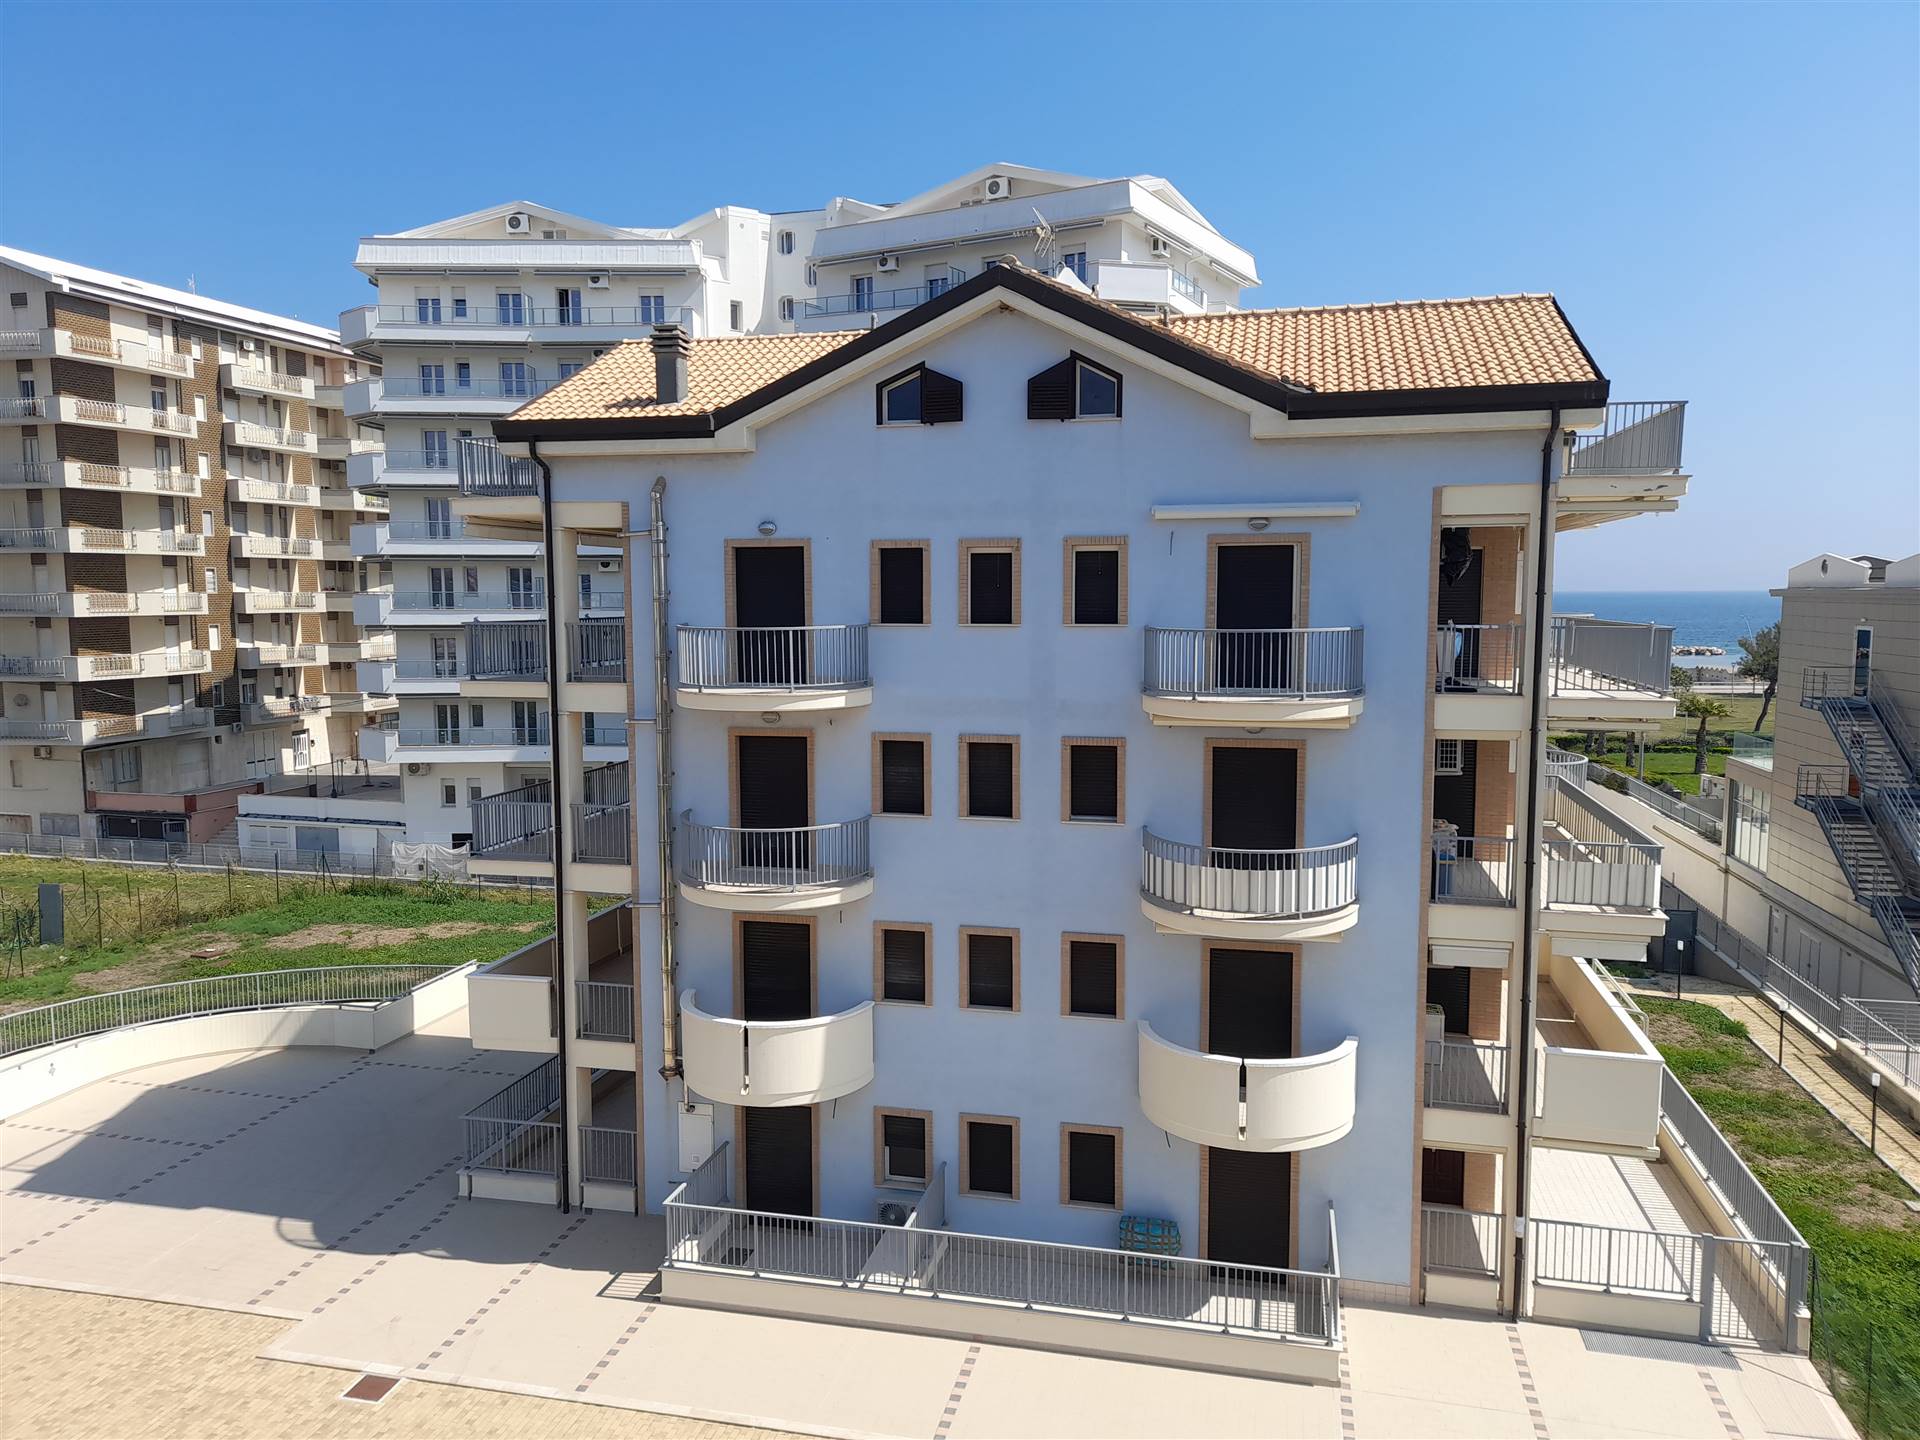 SAN SALVO MARINA, SAN SALVO, New building for sale of 100 Sq. mt., New construction, Heating Individual heating system, Energetic class: C, Epi: 1 